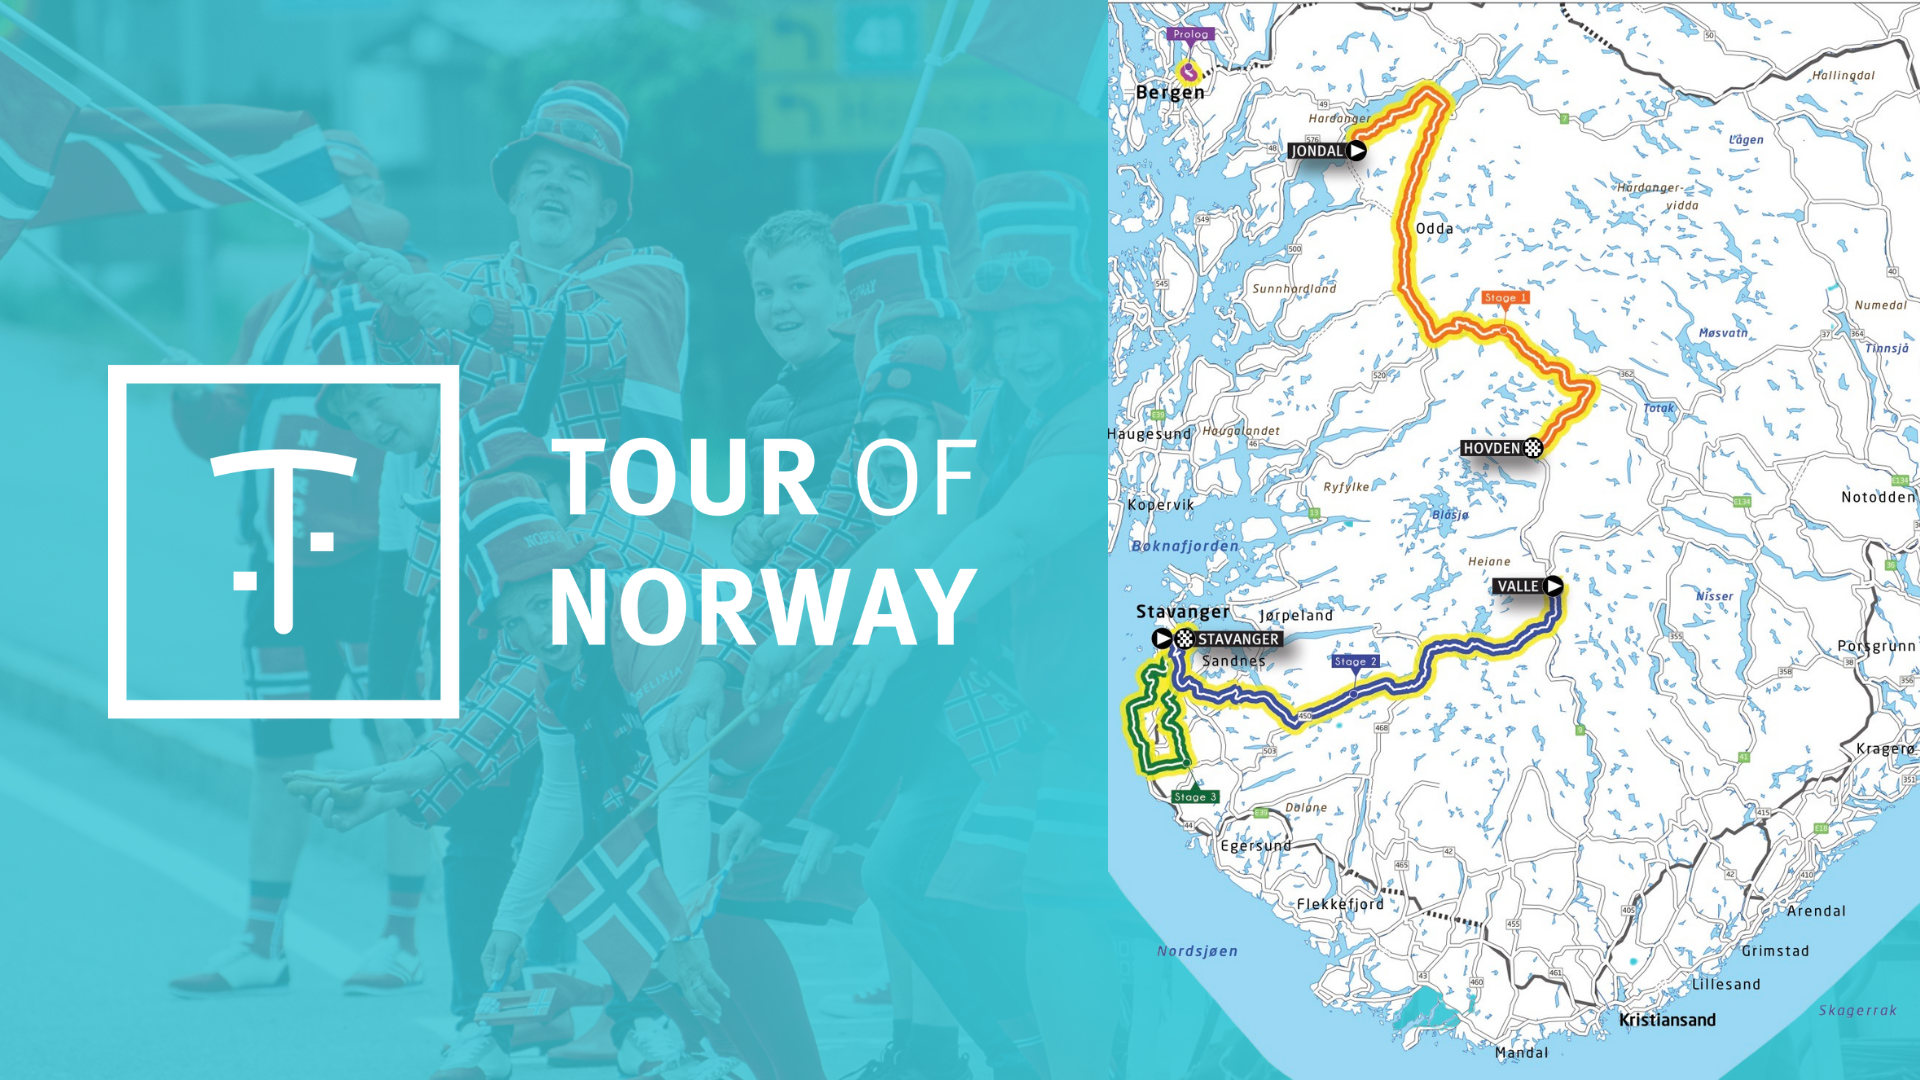 News | Tour of Norway